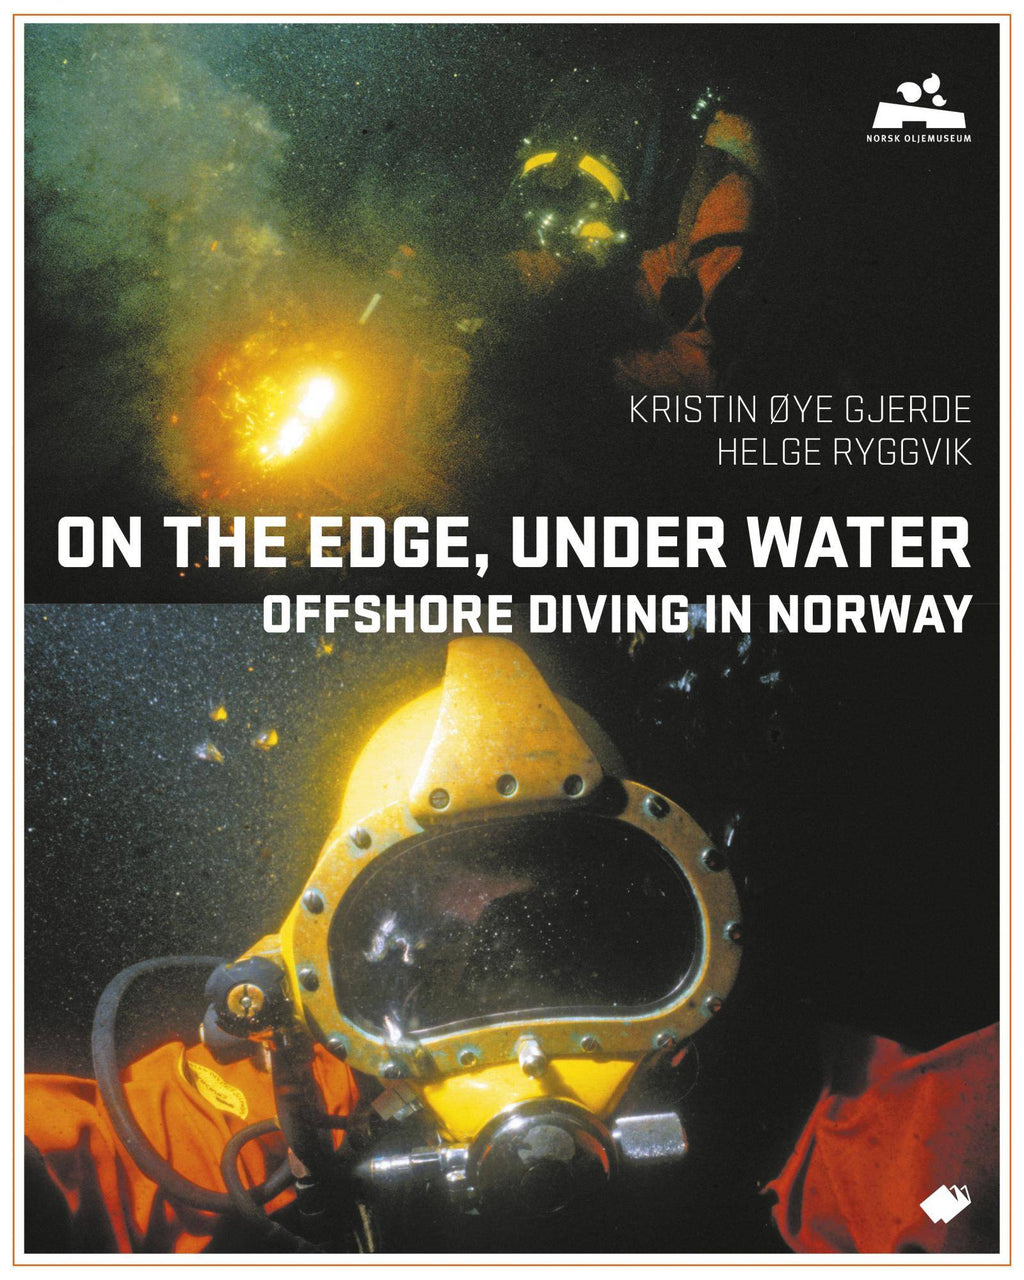 On the edge, under water : offshore diving in Norway